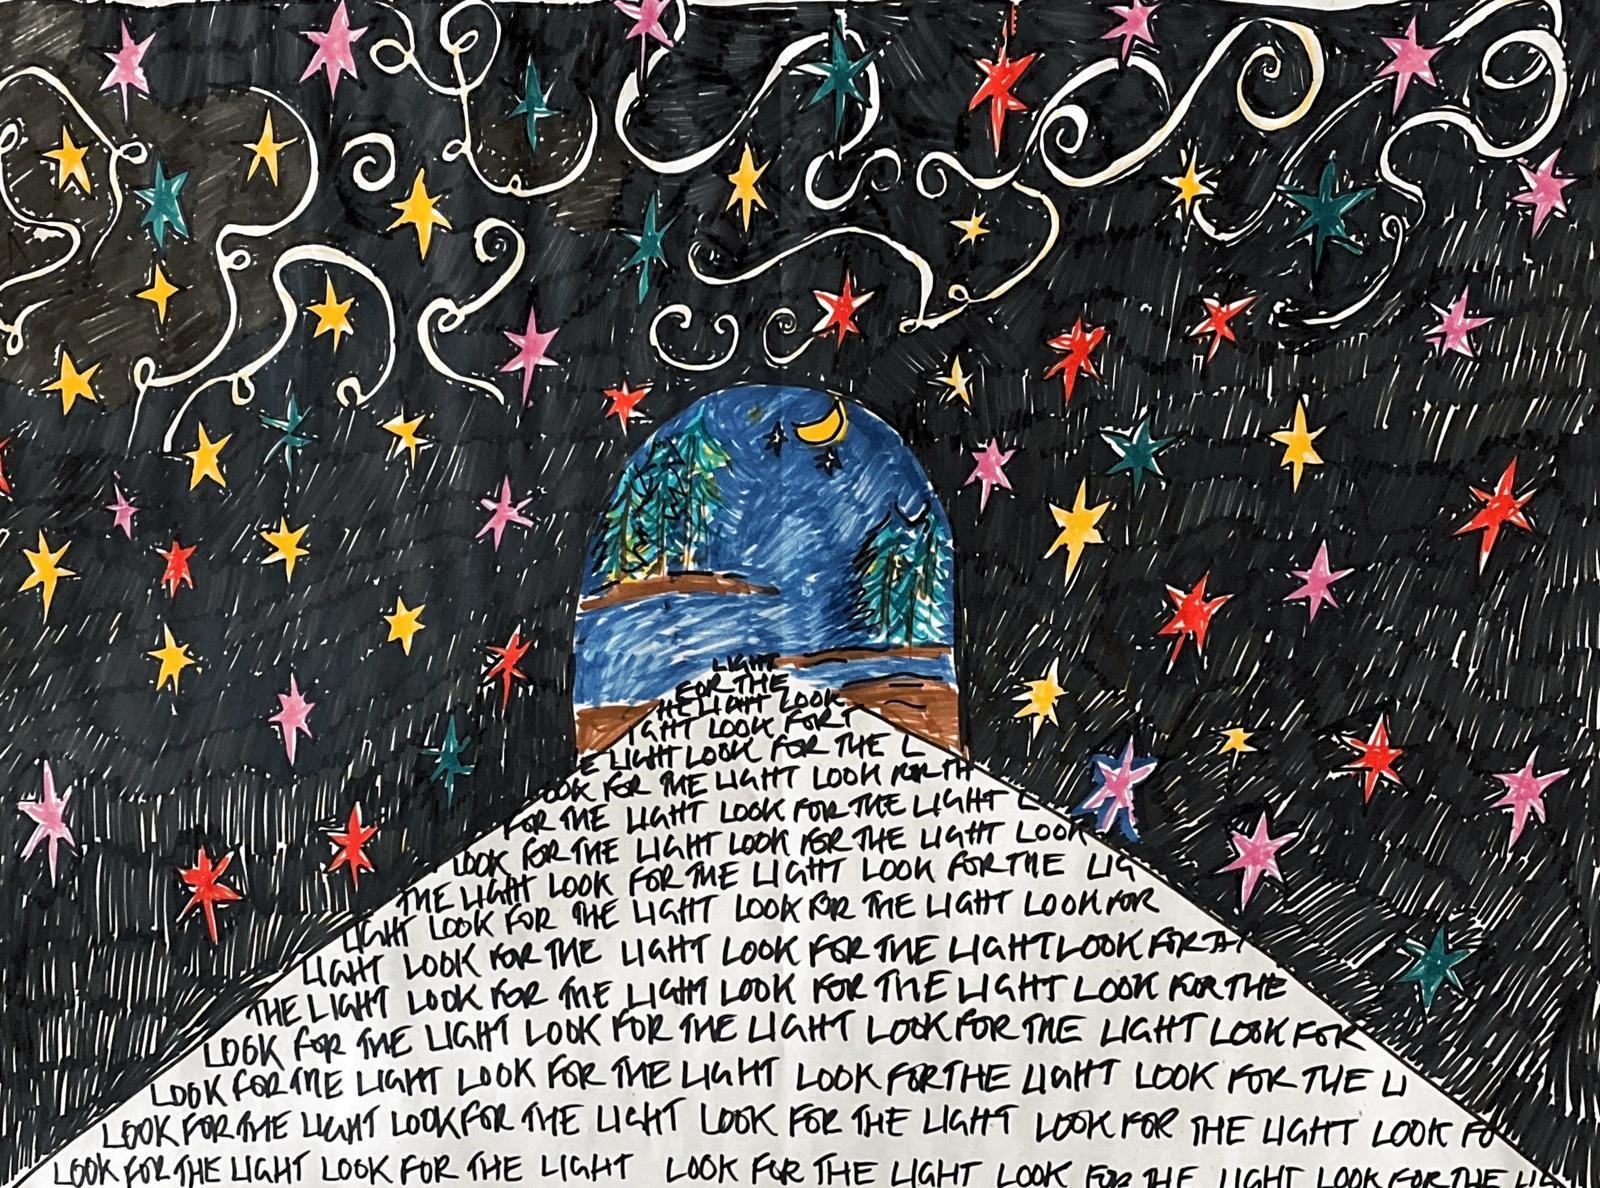 Drawing of an image with white mountain inscribed with 'look for the light' and a bright starry sky in a dark black night.